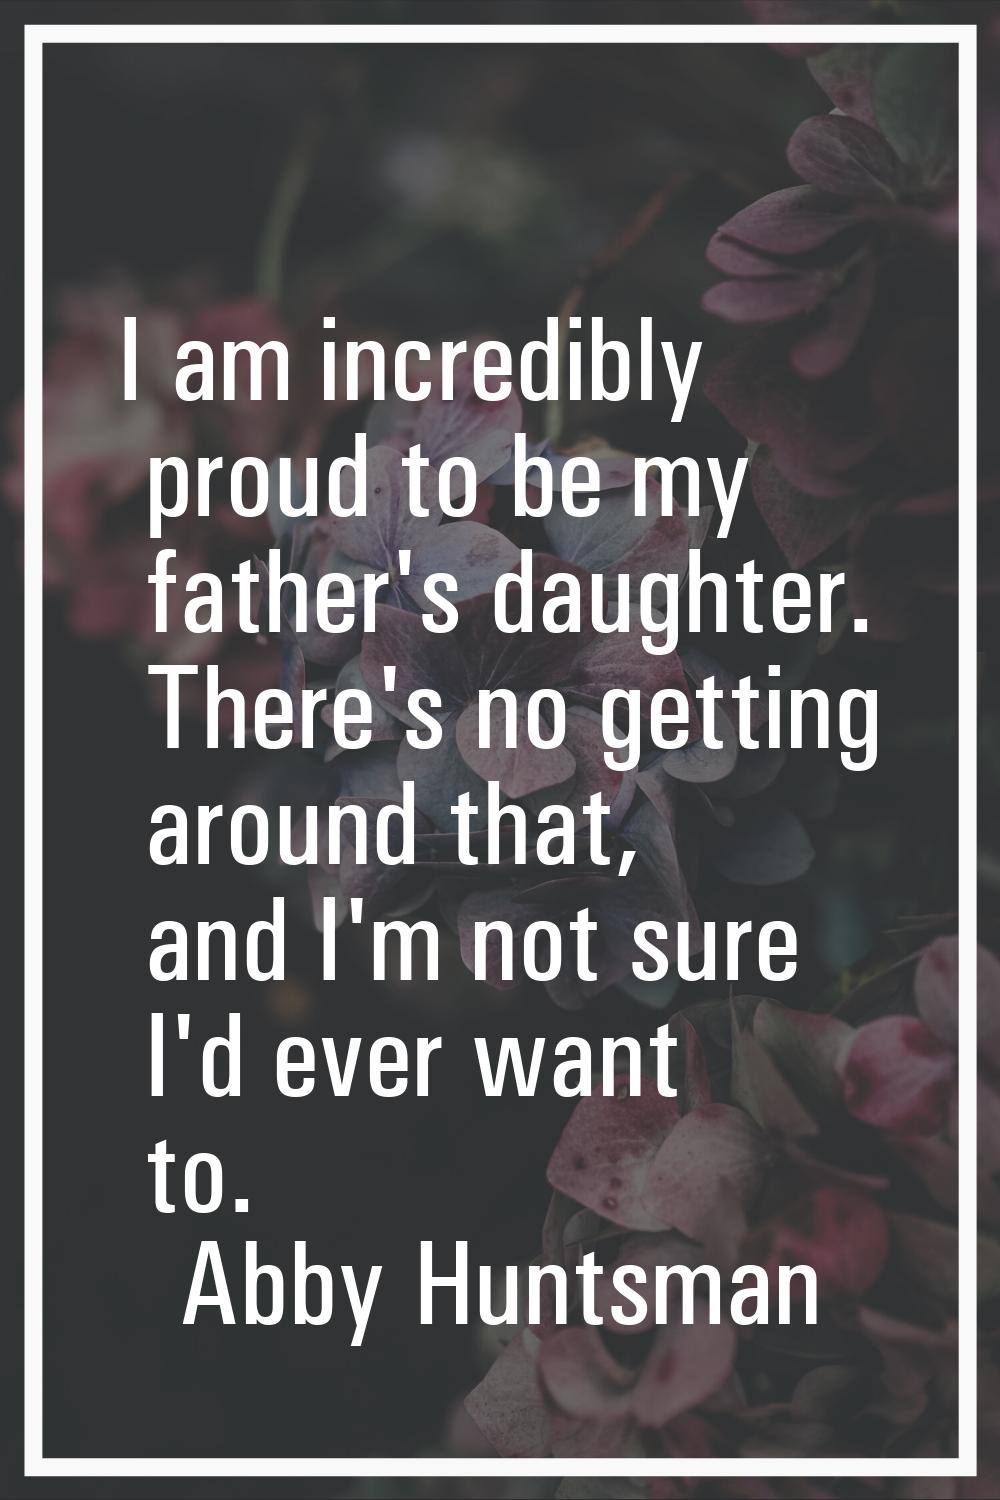 I am incredibly proud to be my father's daughter. There's no getting around that, and I'm not sure 